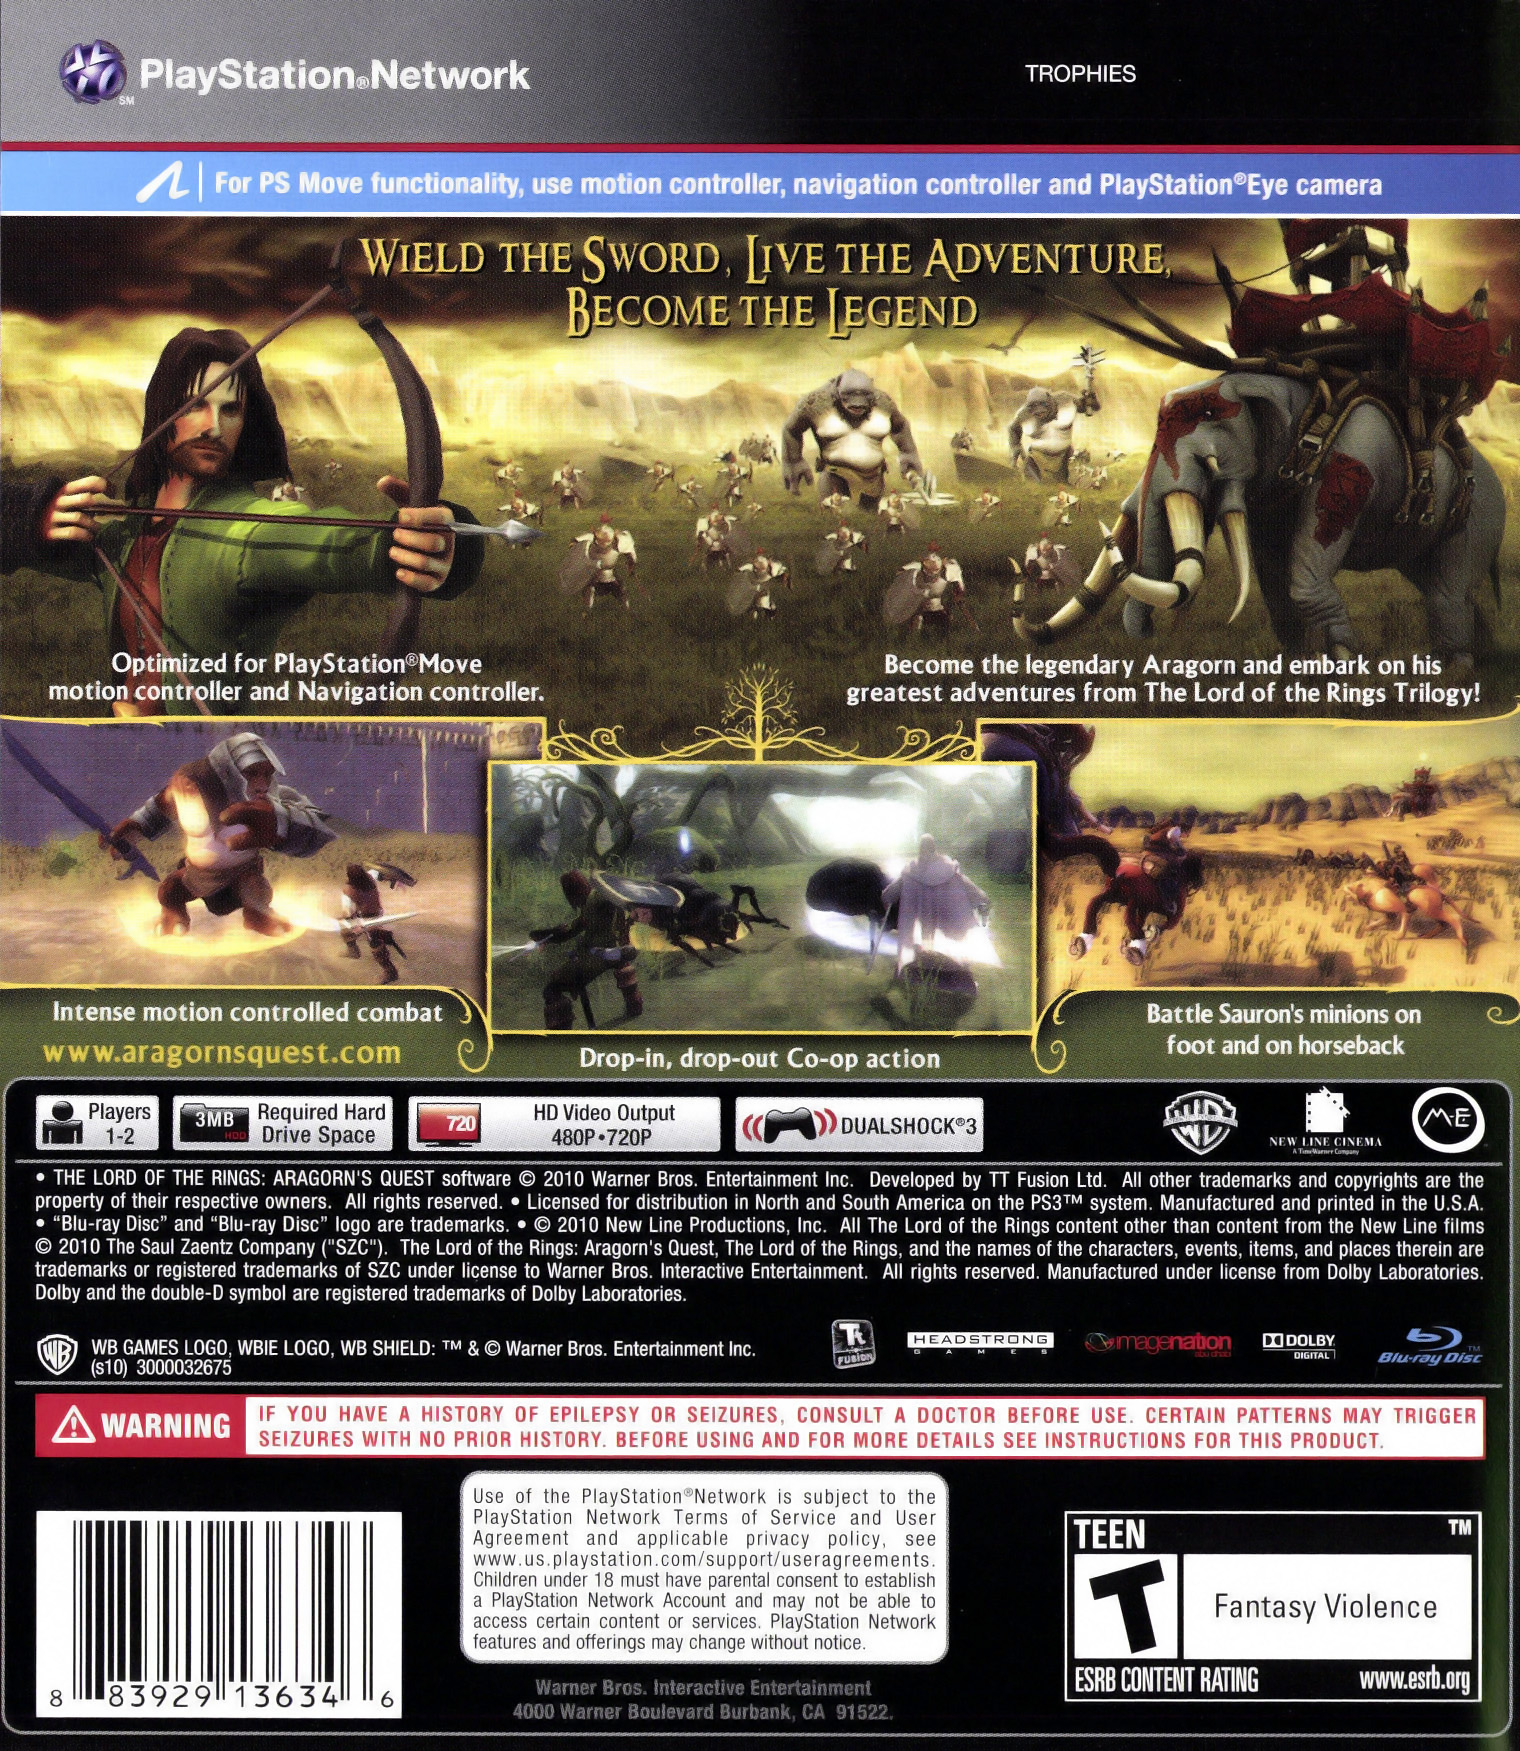 Lord Of Rings: Aragorns Quest, WHV Games, PlayStation 3, 883929136346 - image 2 of 8